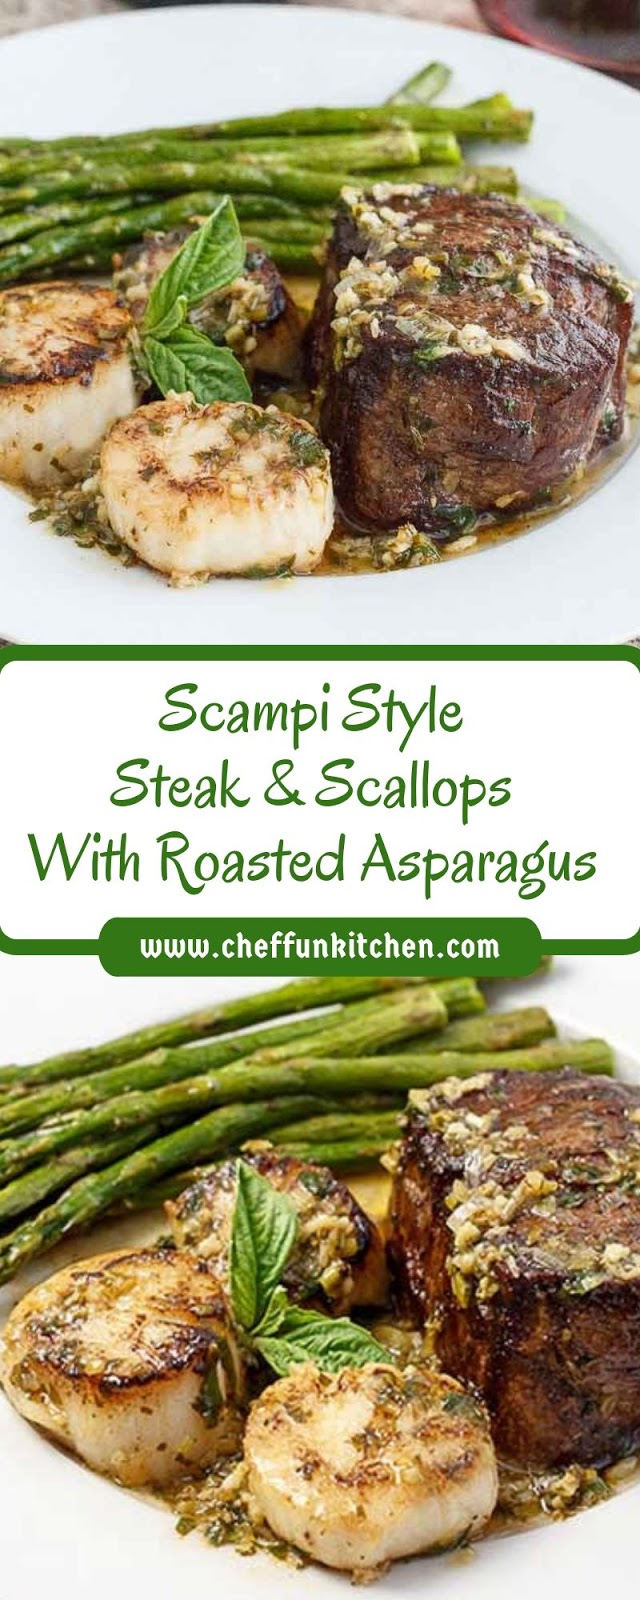 Scampi Style Steak & Scallops With Roasted Asparagus